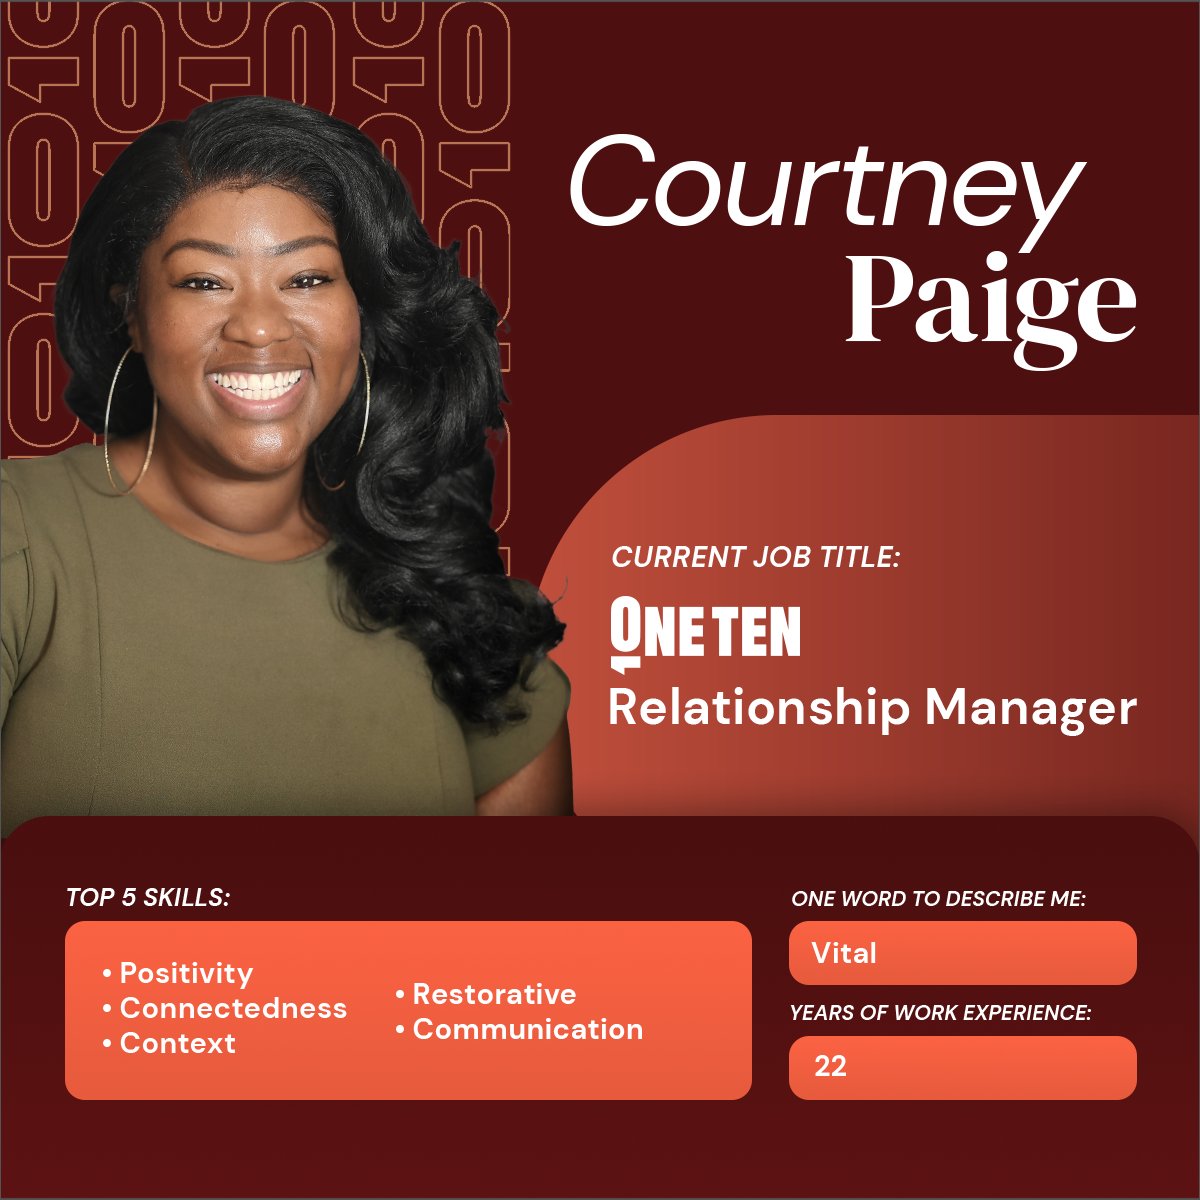 Meet Courtney Paige, our Relationships Manager! With her ability to connect, she connects leaders & communities, propelling us towards OneTen's mission of placing one million talent into family-sustaining careers.